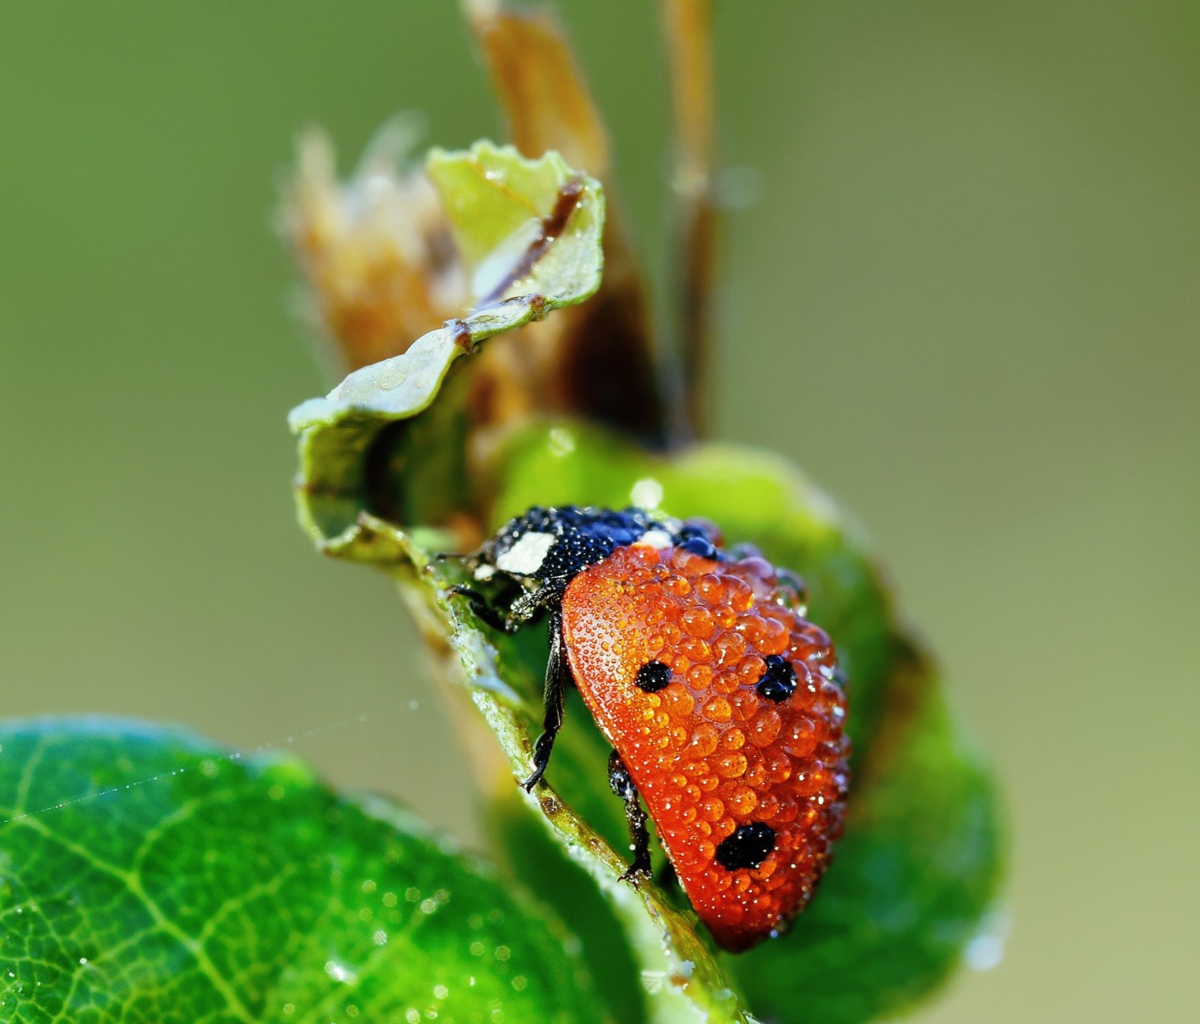 Das Ladybug Covered With Dew Drops Wallpaper 1200x1024